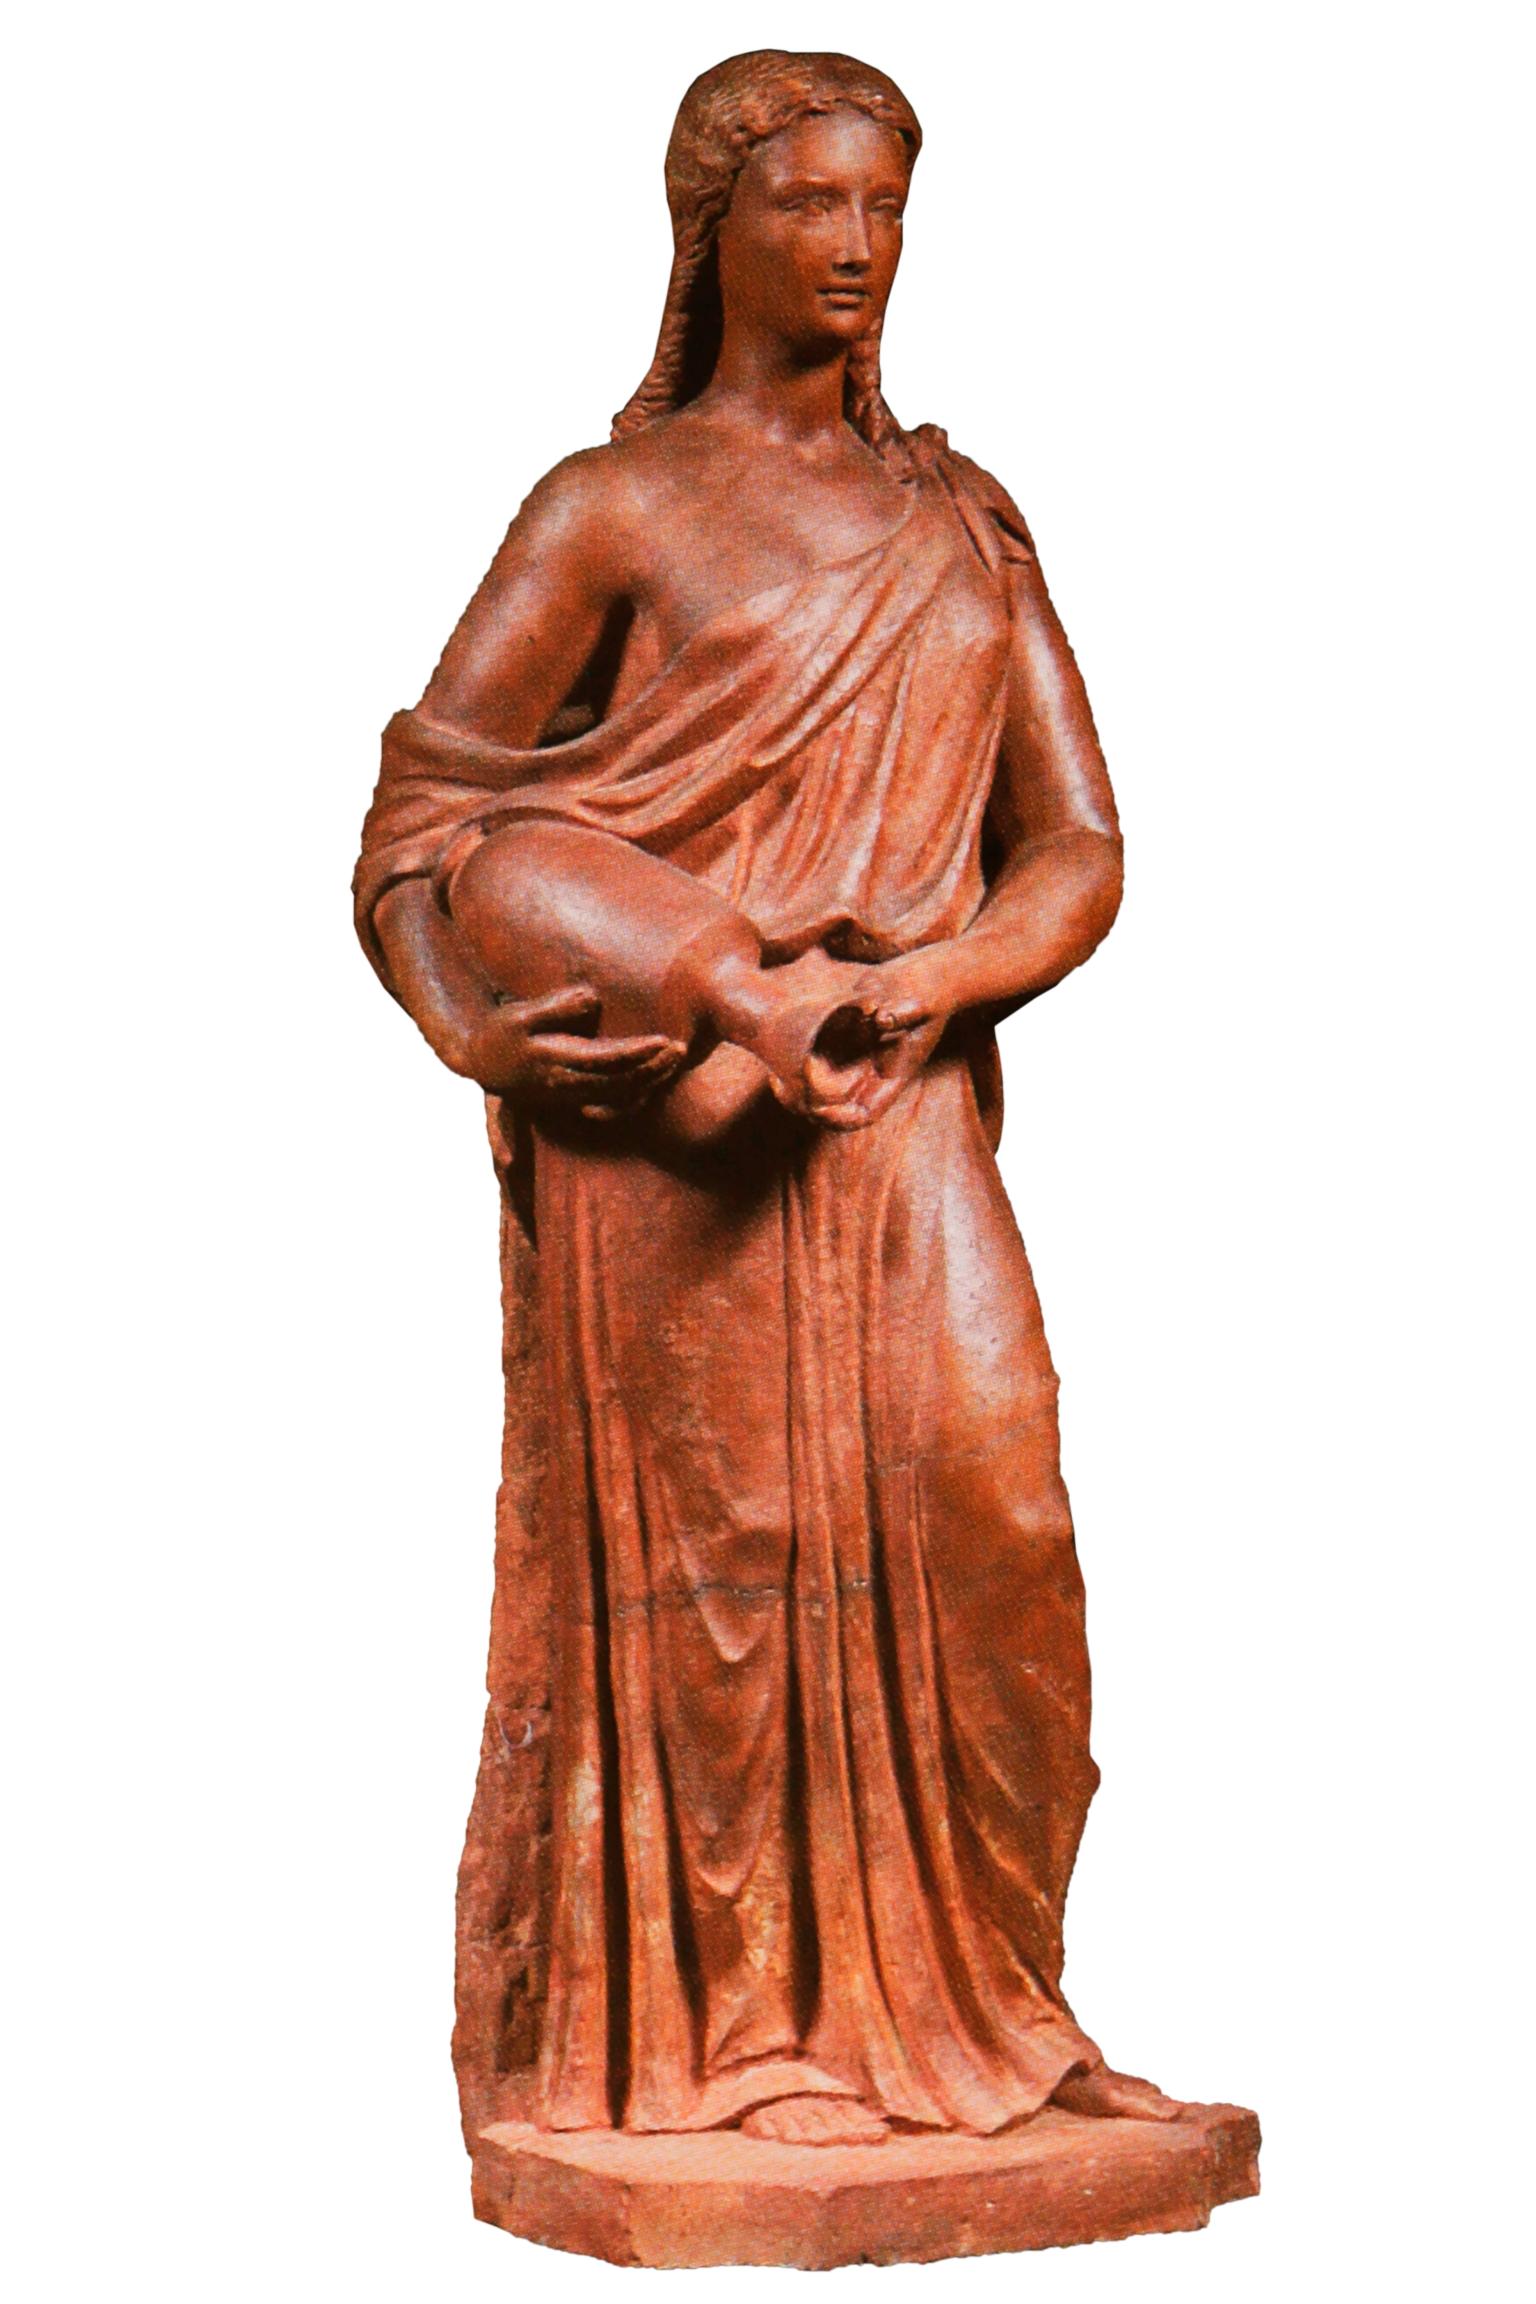 Spanish 20th century terracotta figure of a classical Maiden depicted standing and holding an Amphora, on an inverted rectangular plinth. Signed 